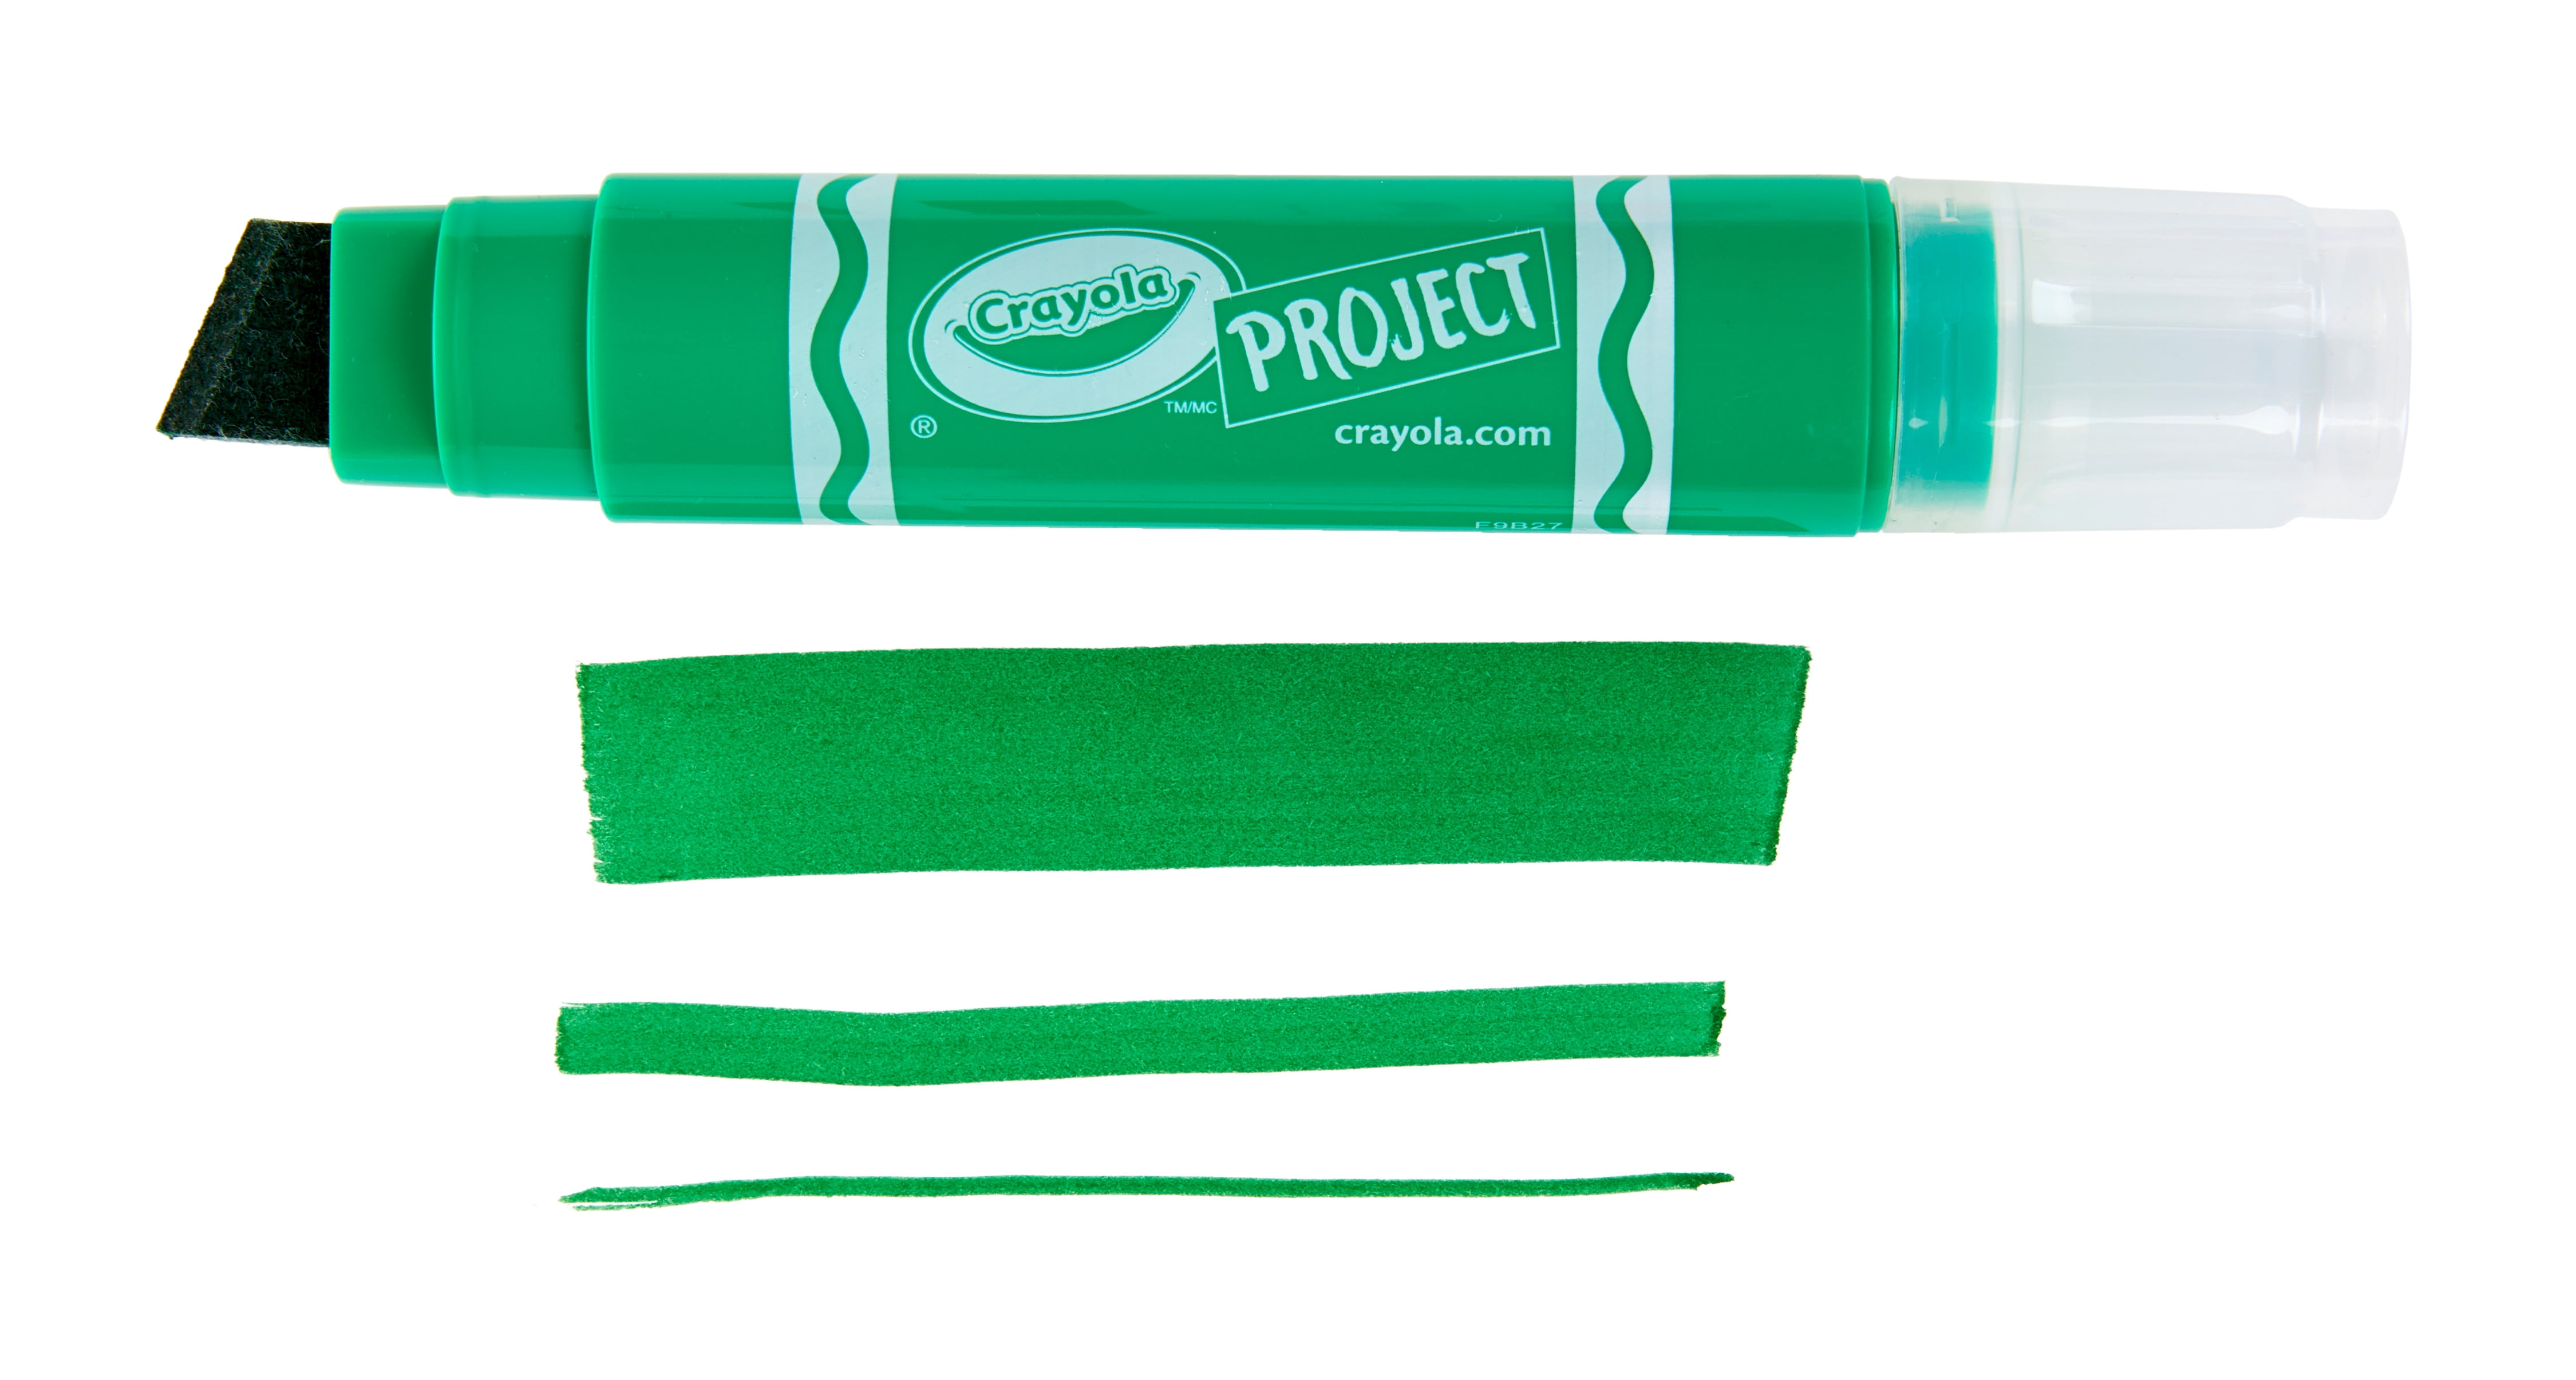 4ct Crayola Project Xl Poster Markers - Bright Colors : Target